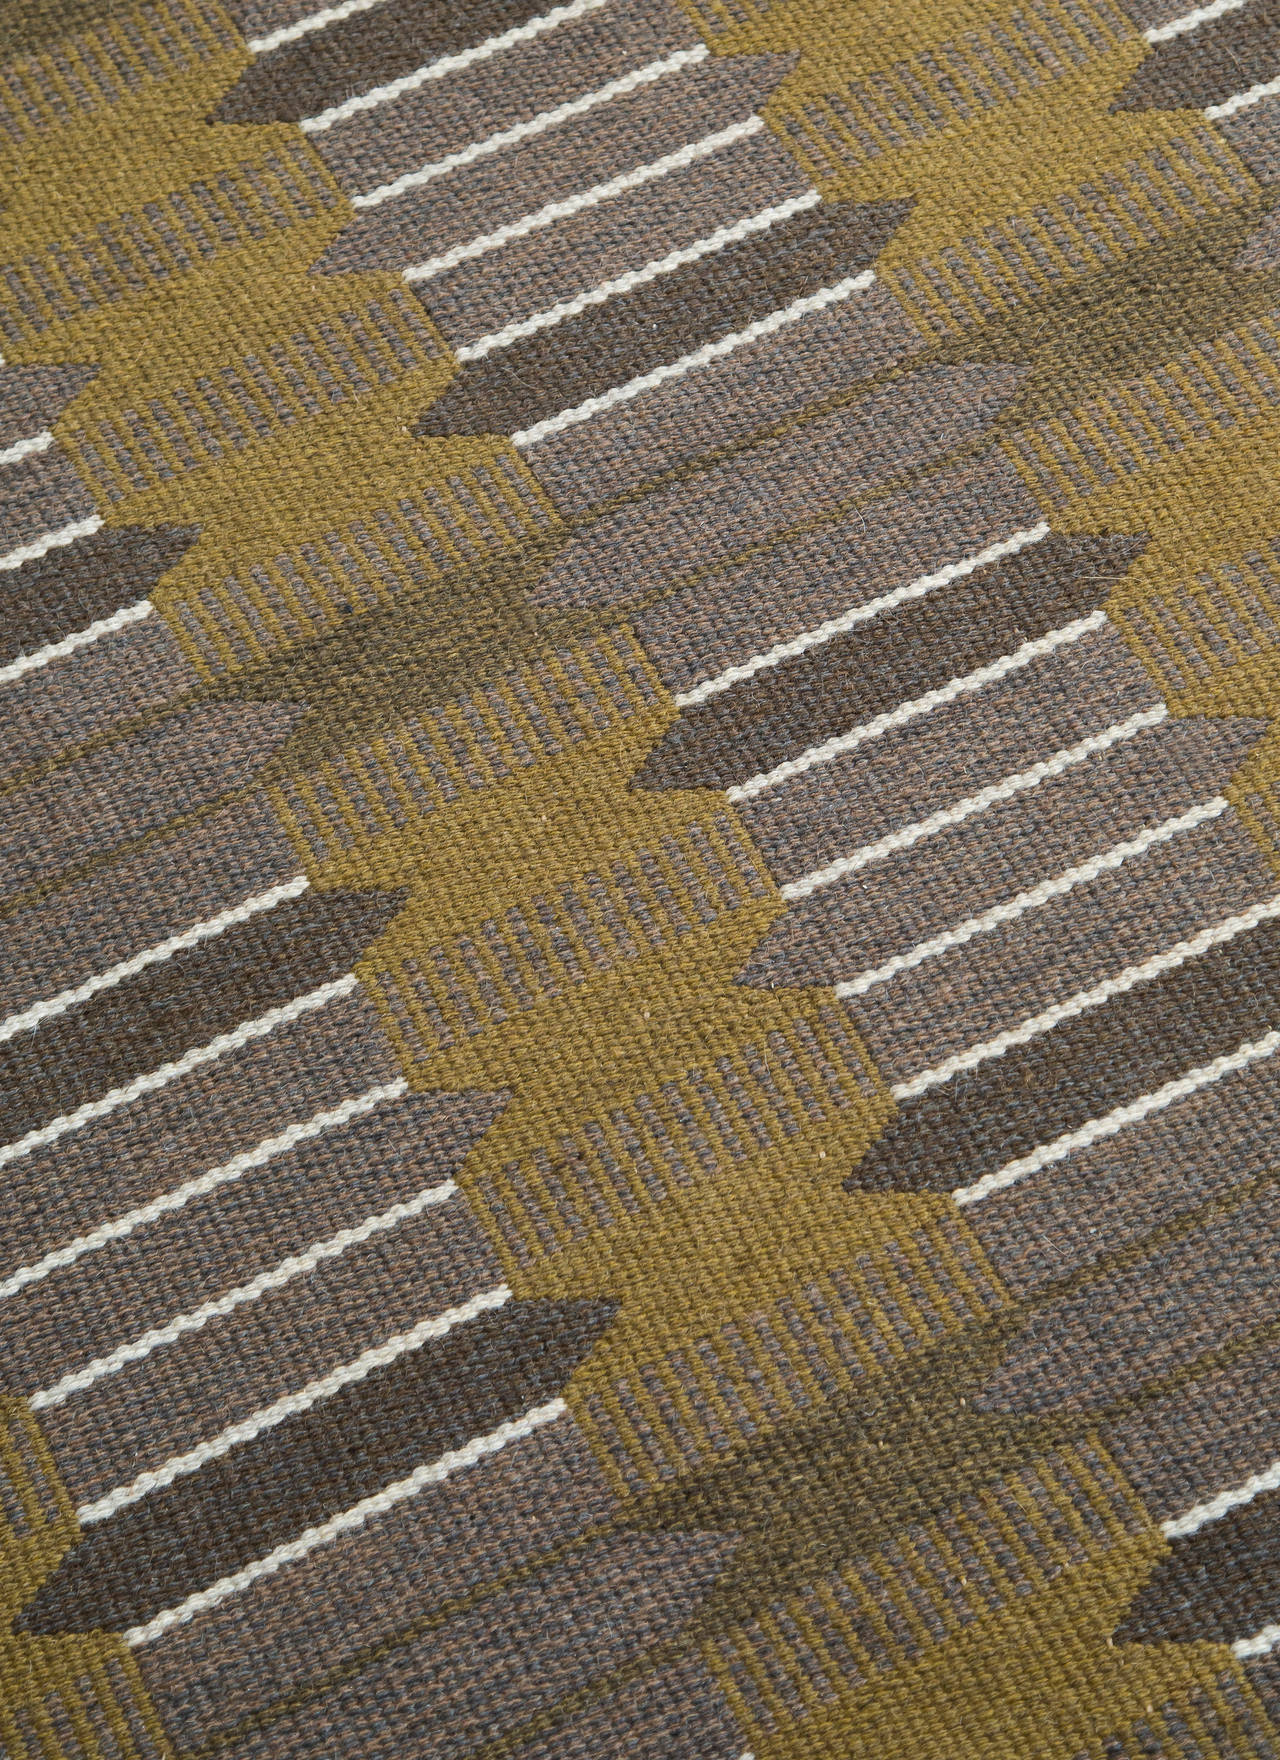 Vintage double-sided flat-weave carpet, Sweden, 1950s.
Kasthall Ab, Sweden. 
Handmade.

Measurements: Length 241 cm, width 168 cm.

Condition: Good original condition, with some minor stains and wear on the back side.